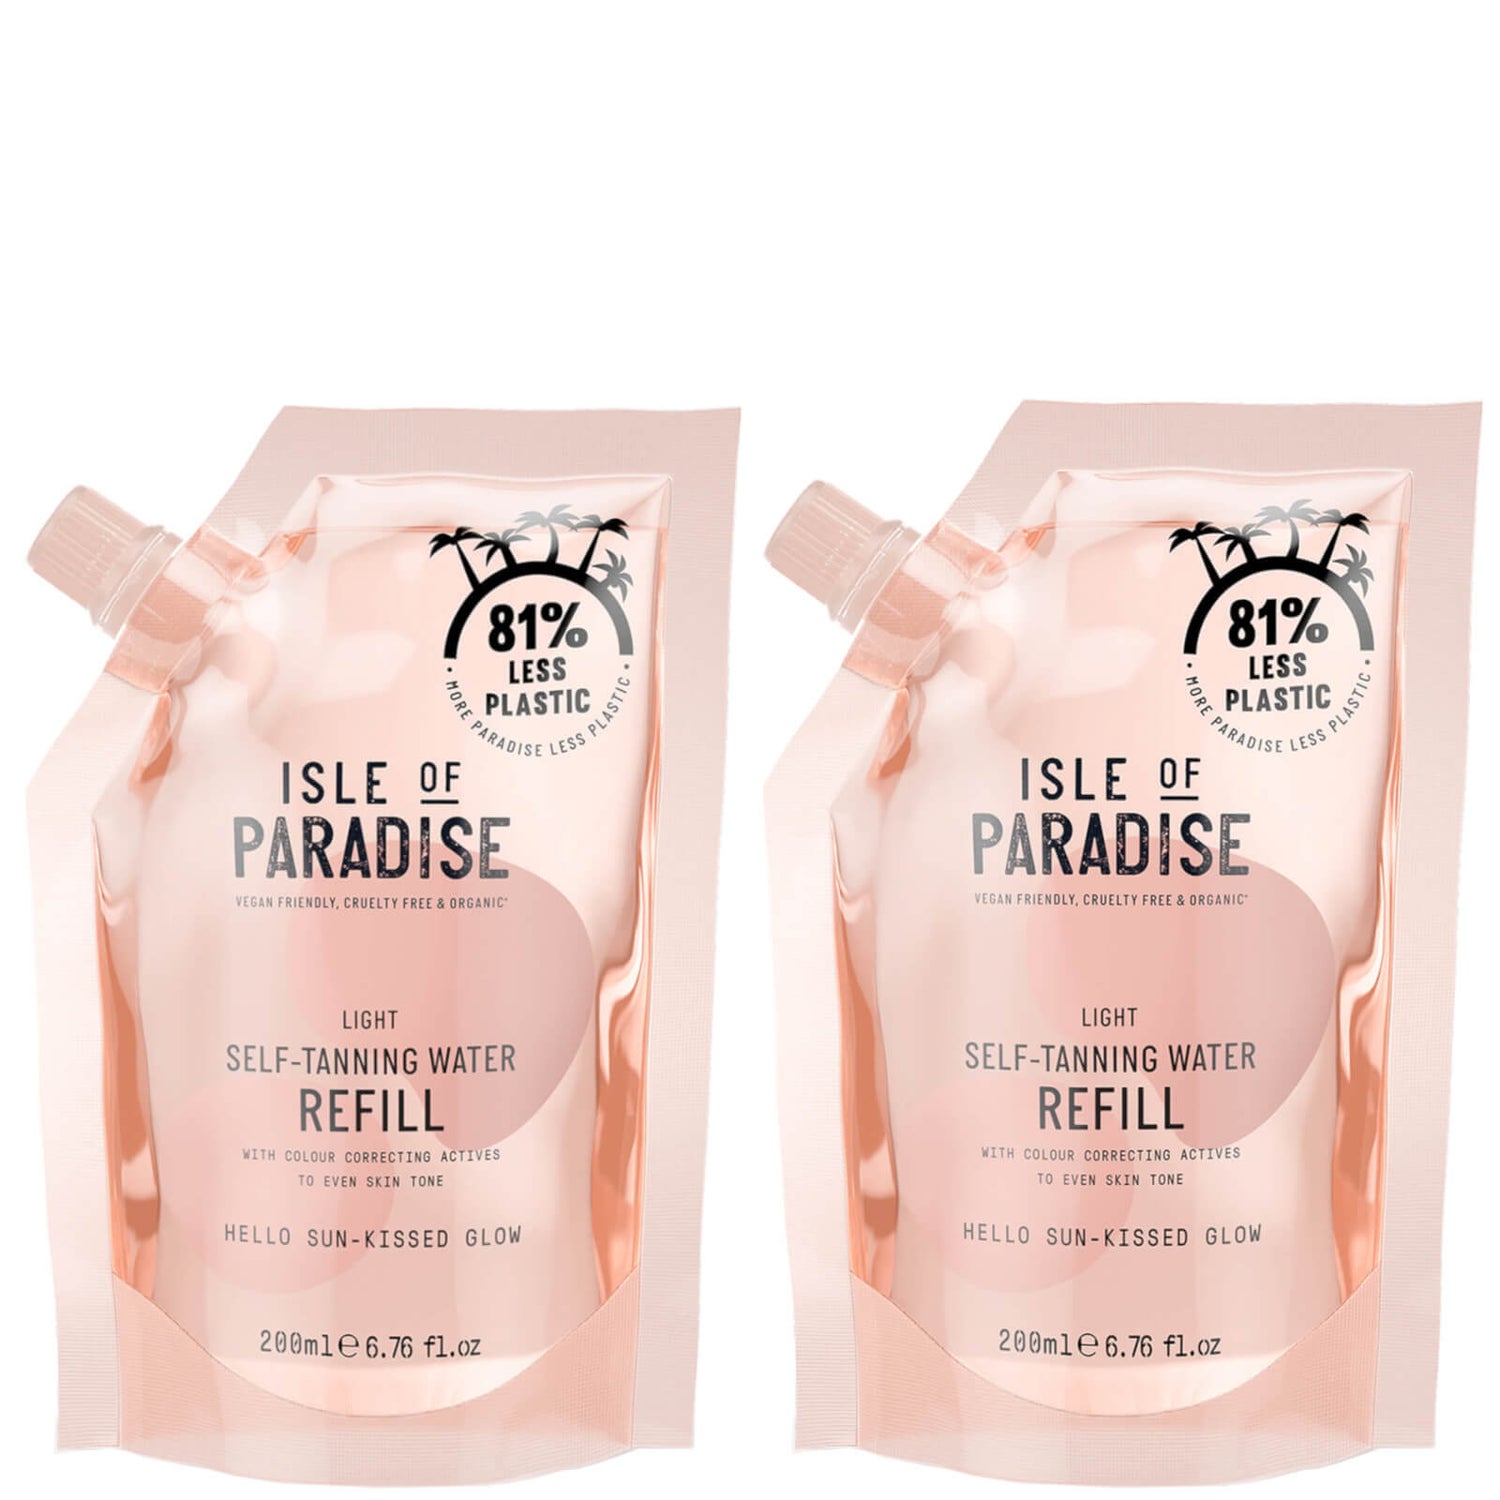 Isle of Paradise Light Self-Tanning Water Refill Duo